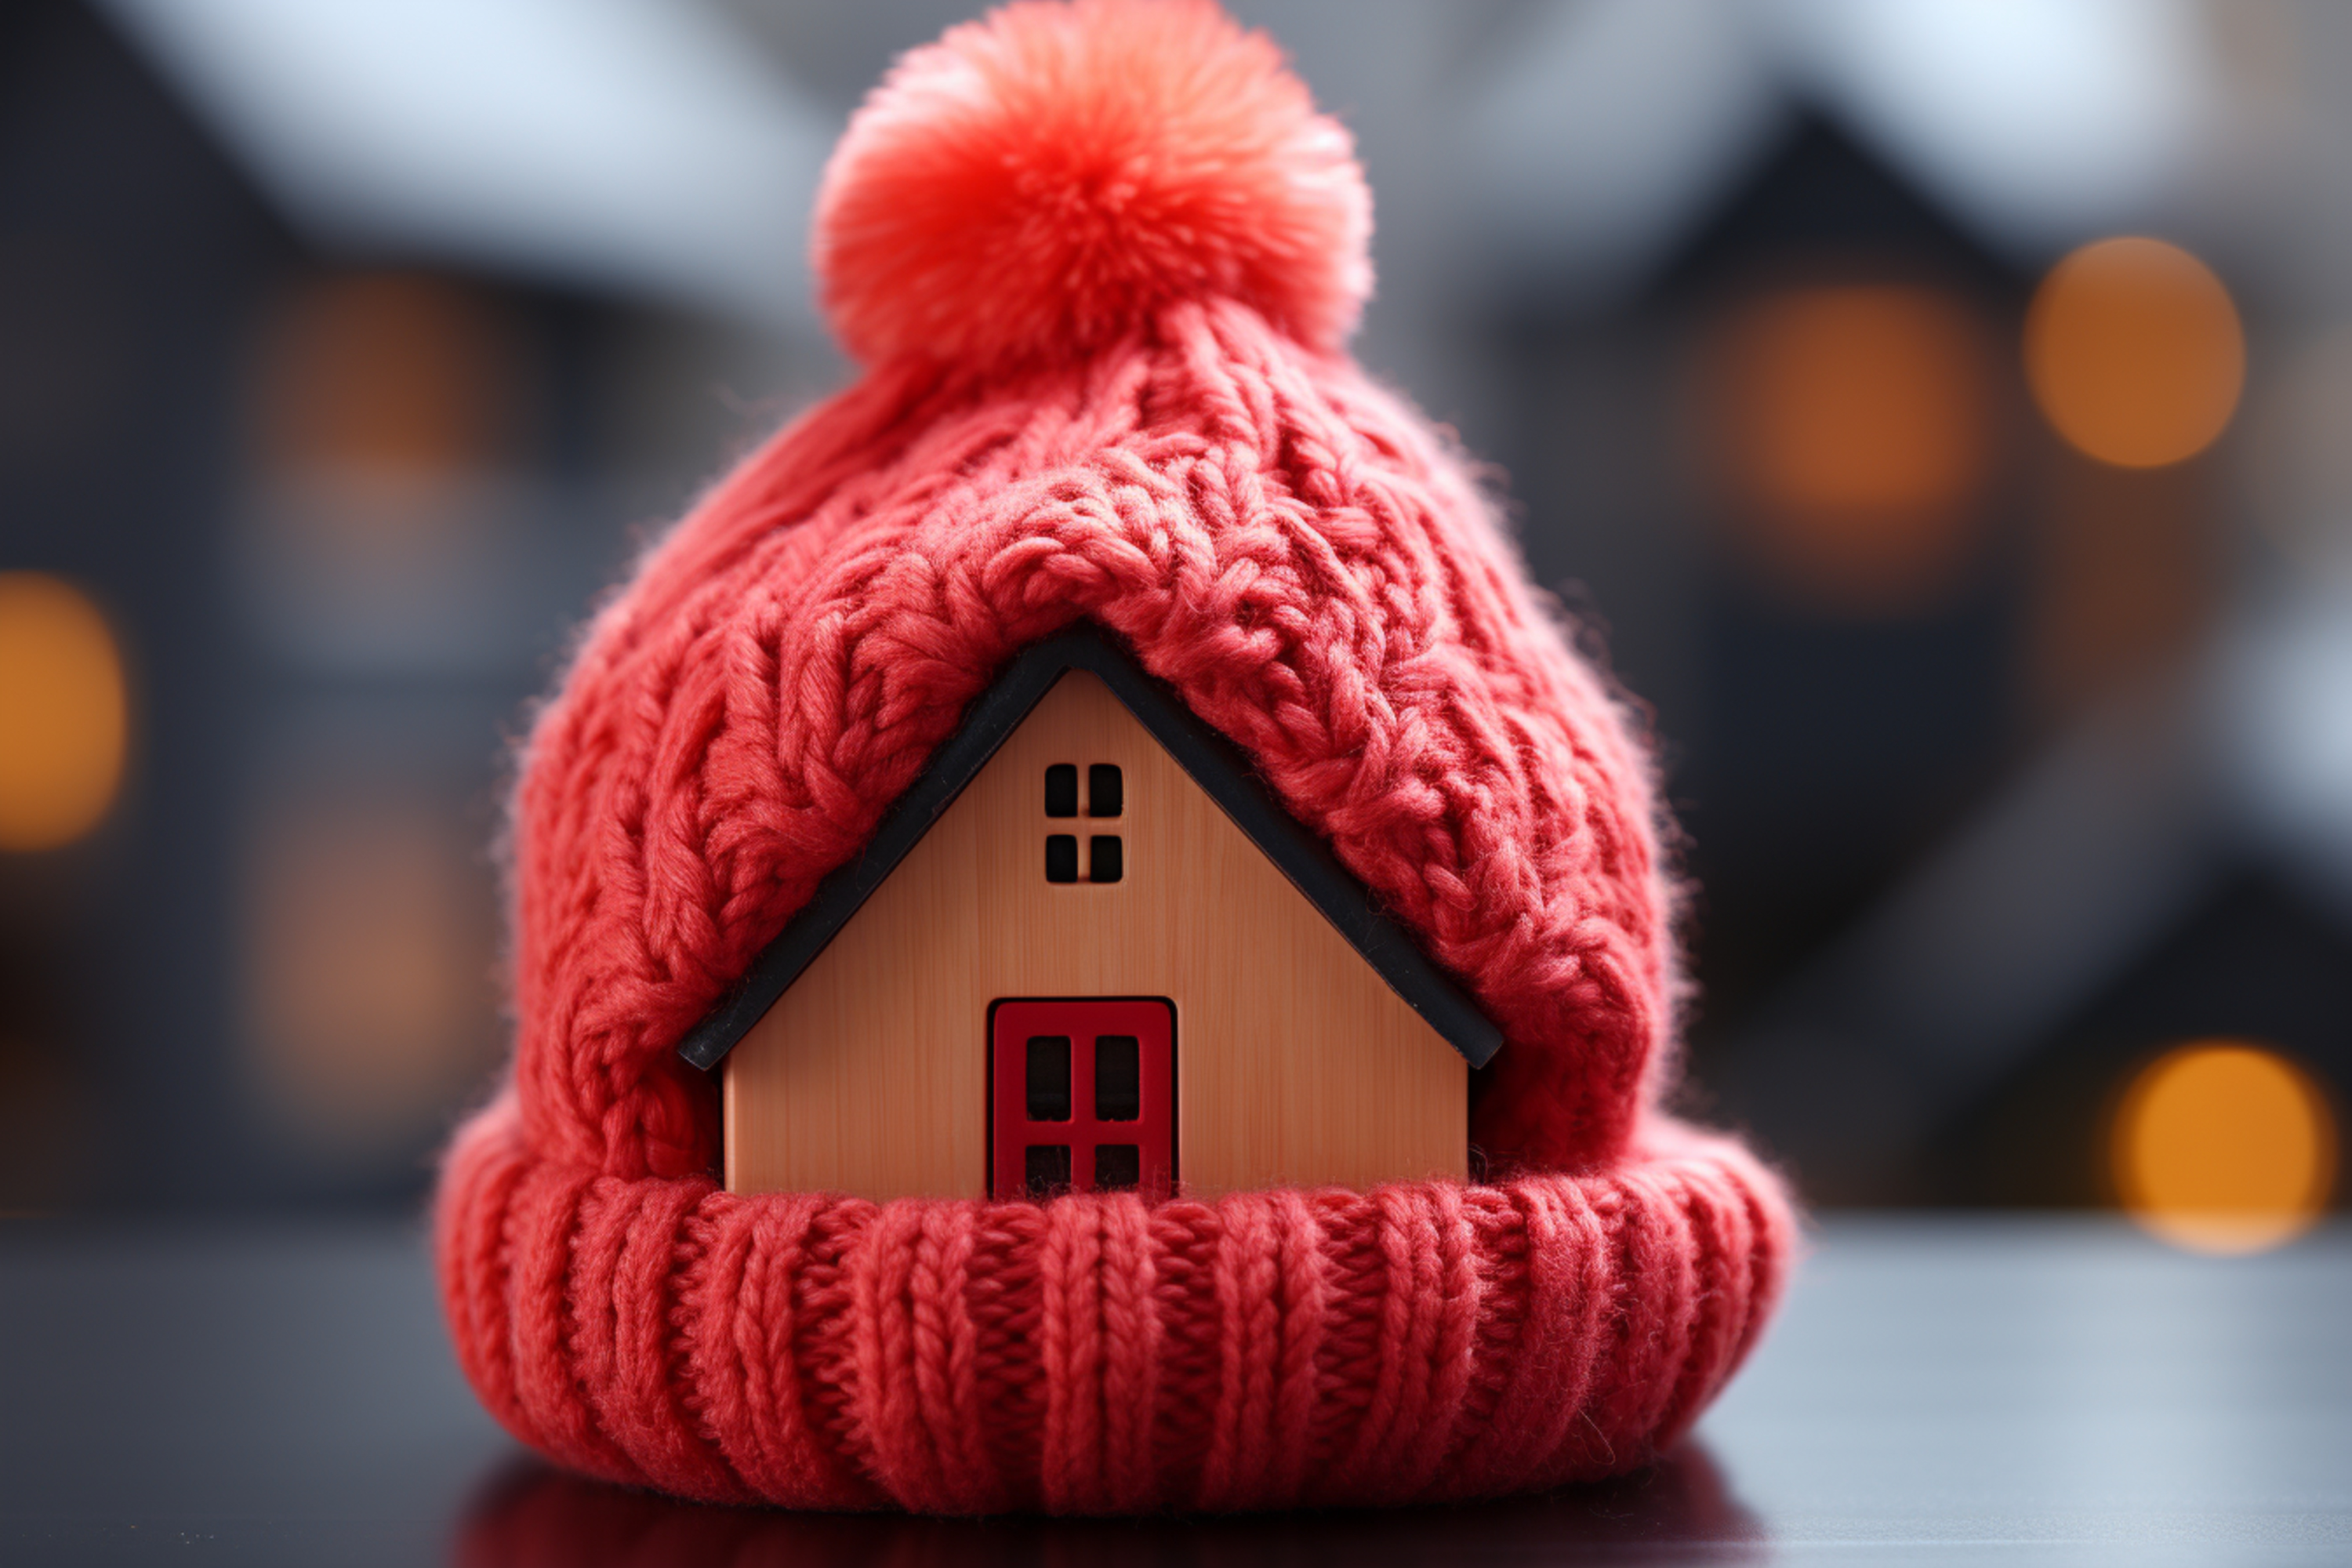 Weatherization is the practice of protecting a building and its interior from the elements, particularly from sunlight, precipitation, and wind.